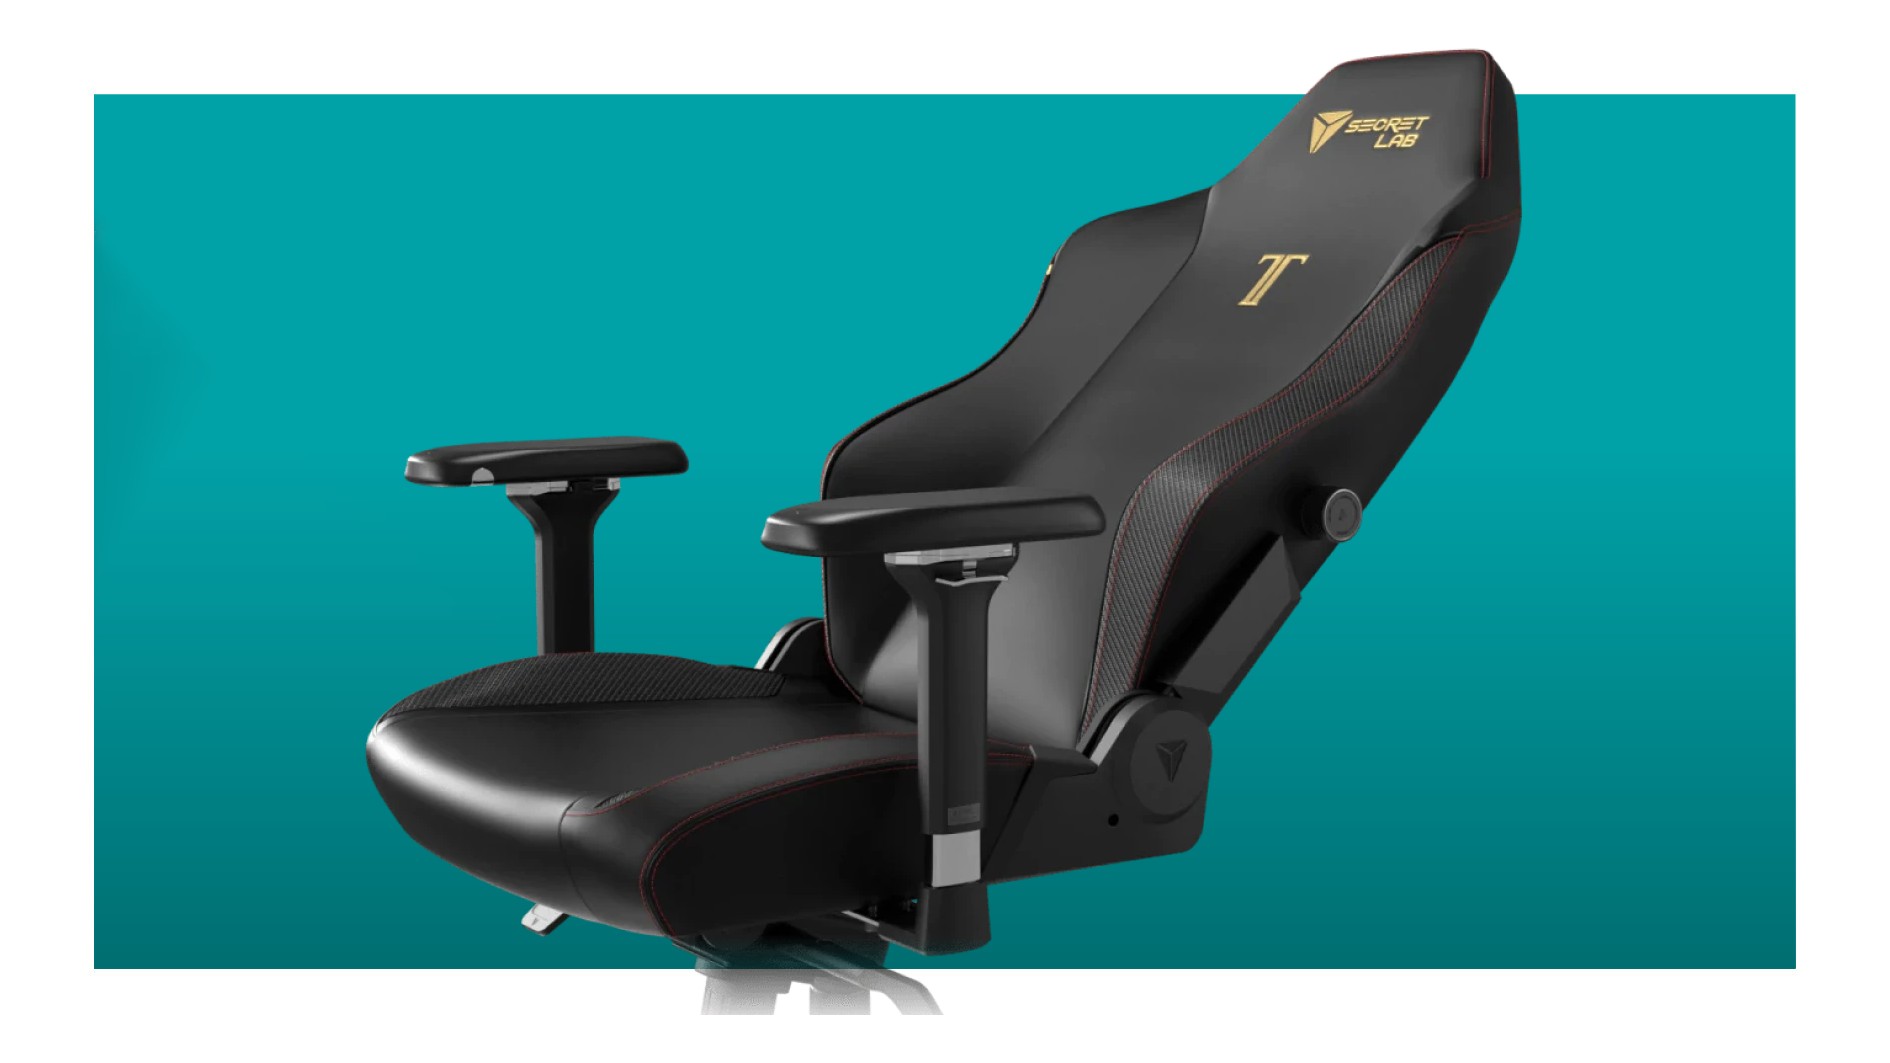  I am very tempted to swap out my no-name office chair for this Prime Day deal on our favorite gaming chair 